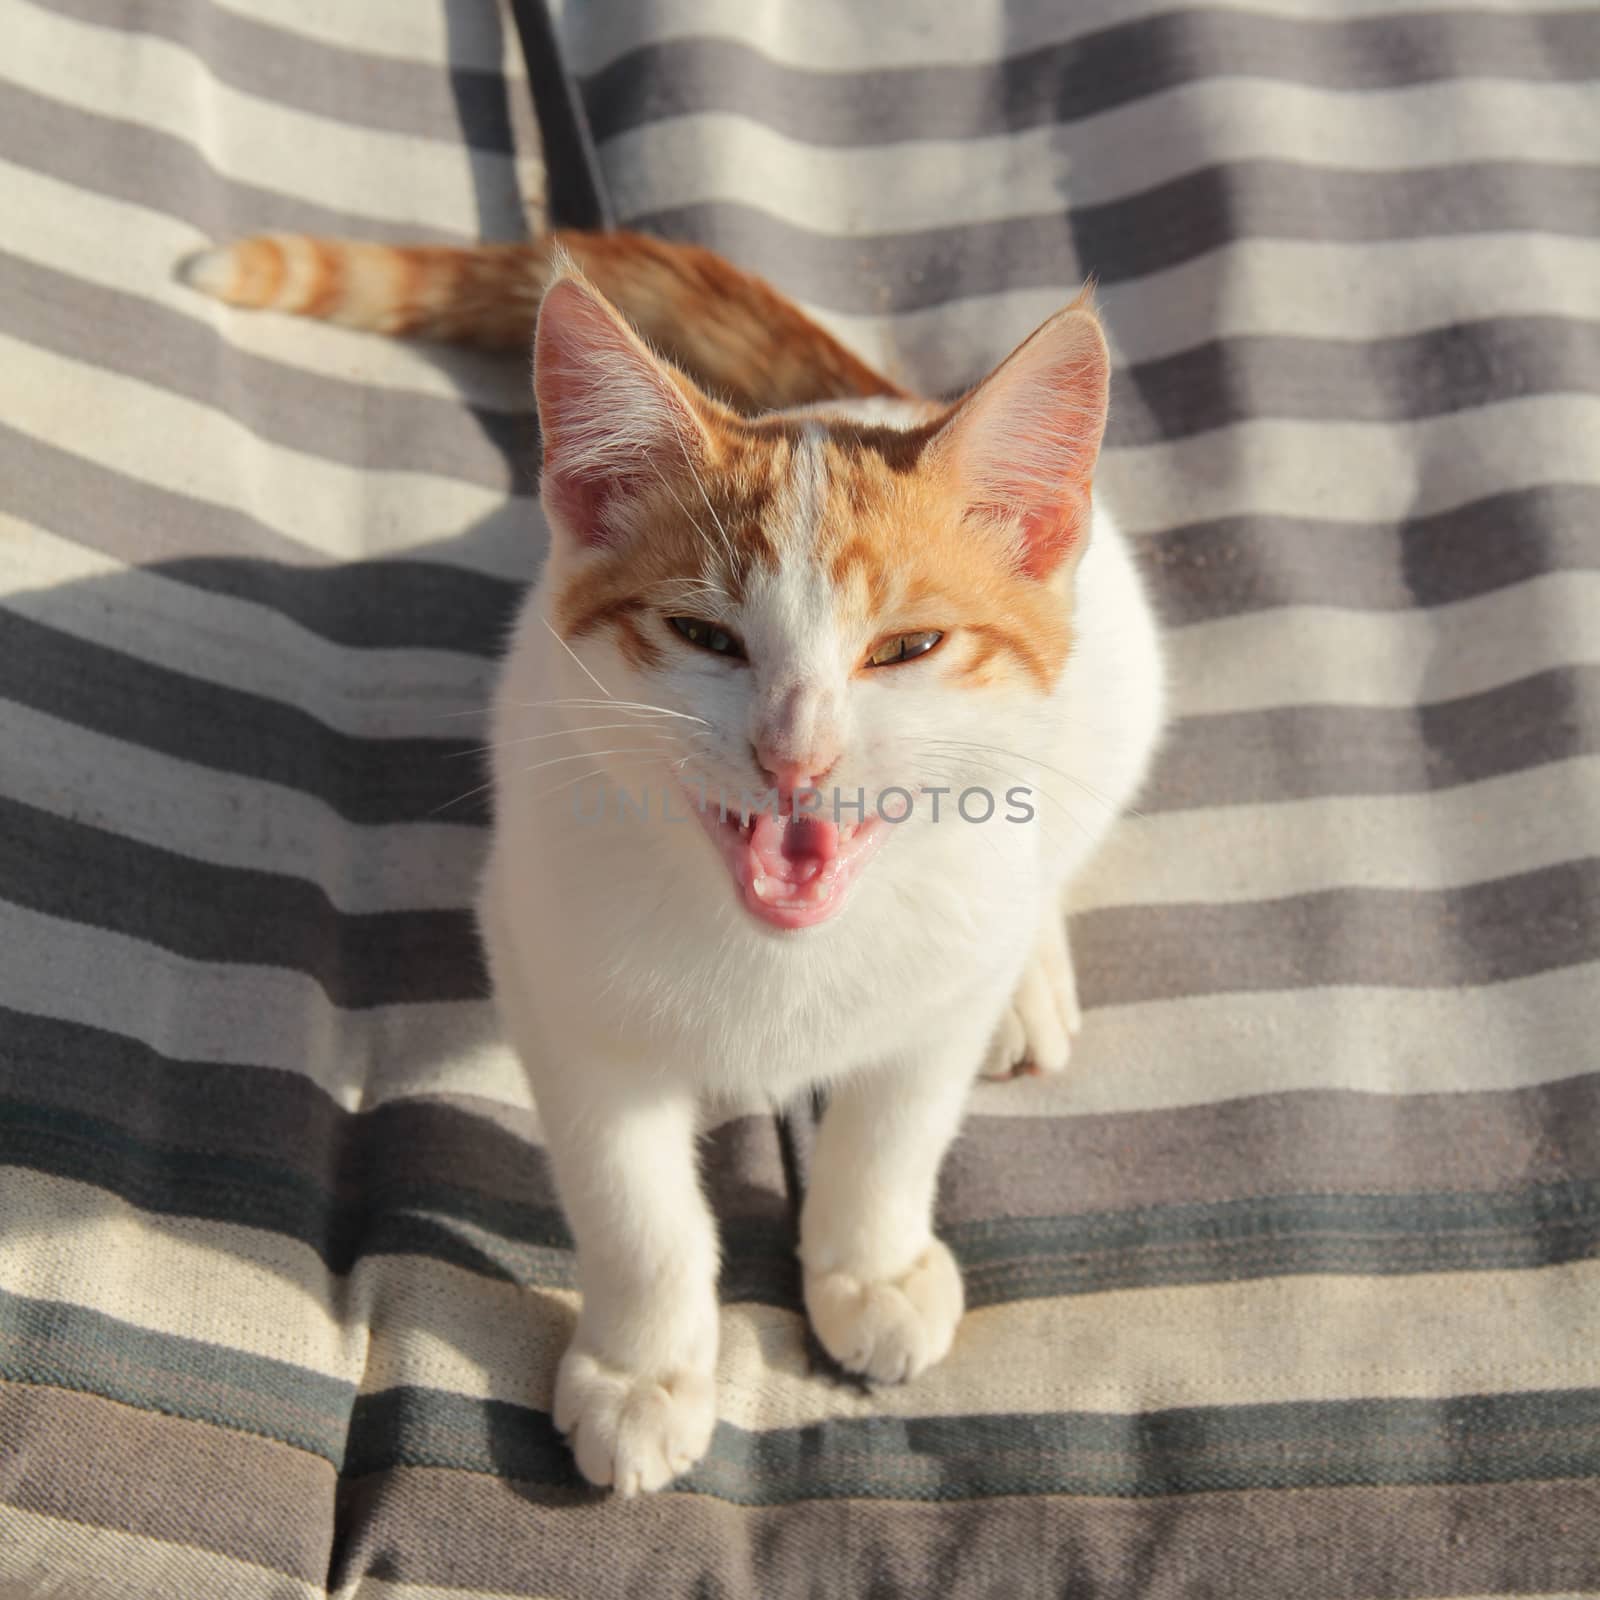 Nice white and red kitten with open mouth in a smile